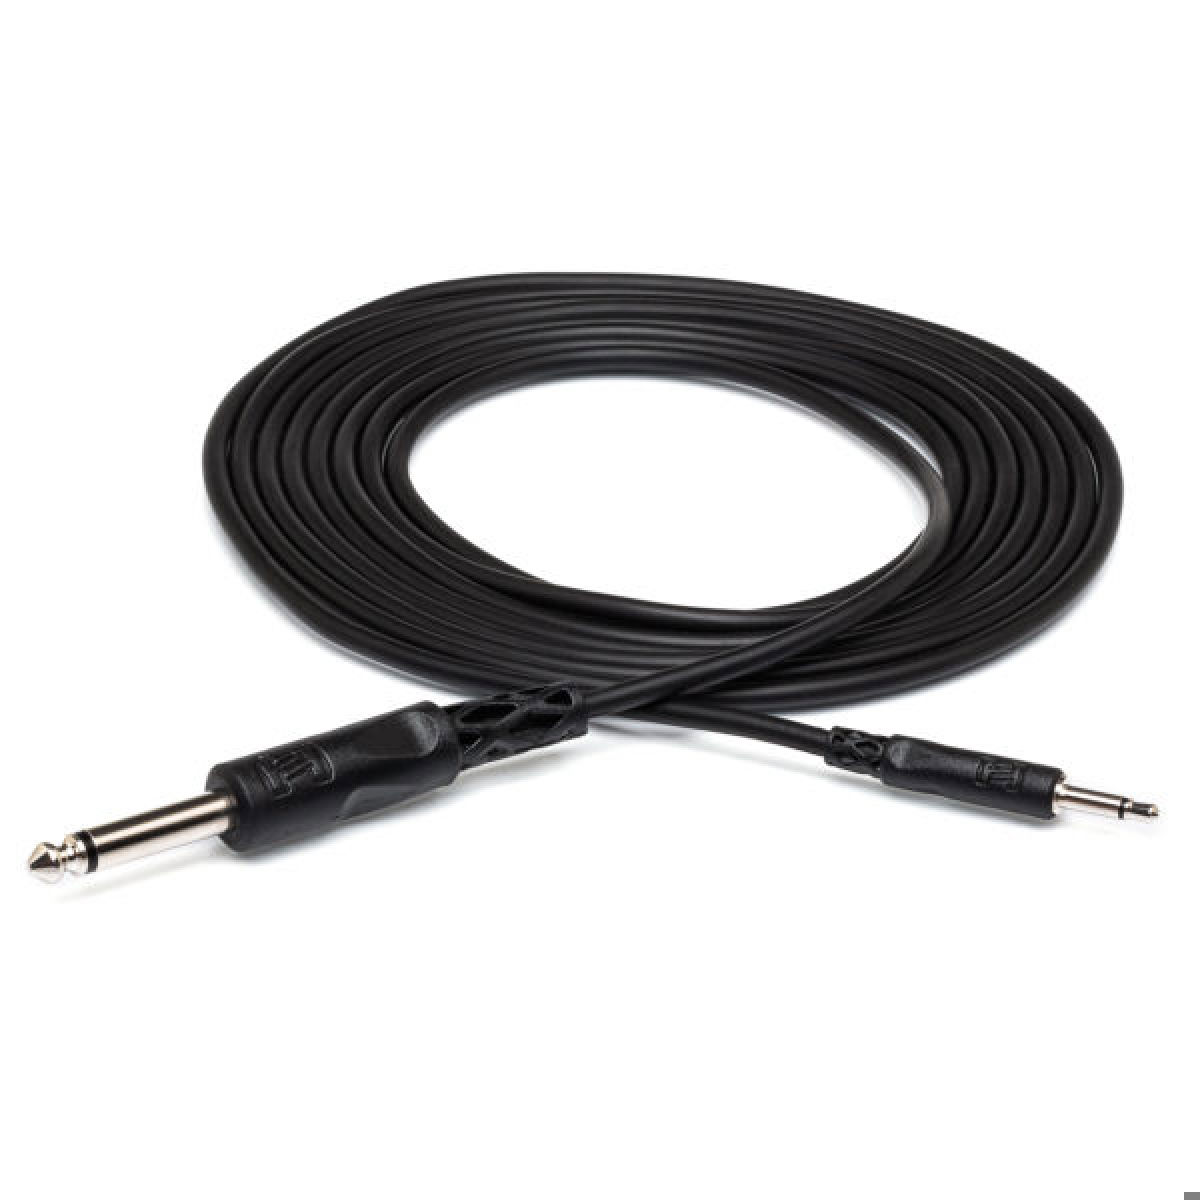 Hosa 3.5mm TS to 1/4" TS Cable